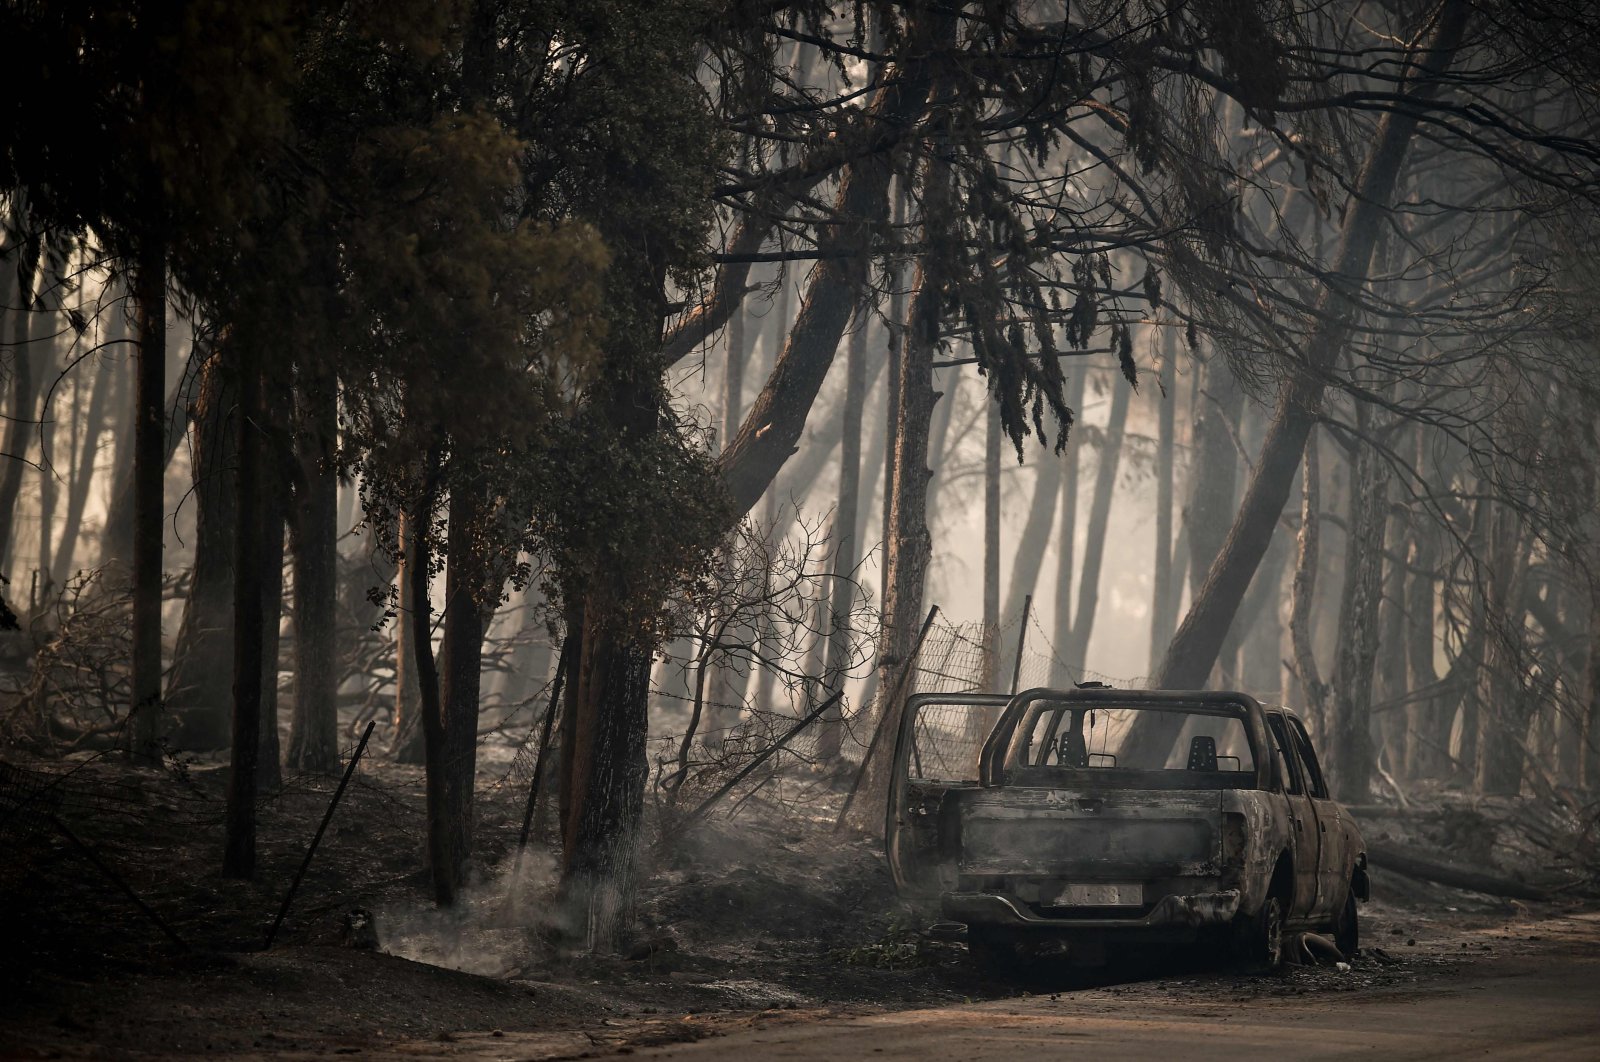 A burned car is seen in a forest in Varybombi, a suburb north of Athens, as fires broke out at the foot of Mount Parnes, 30 kilometers north of Athens, Greece, Aug. 4, 2021. (AFP File Photo)